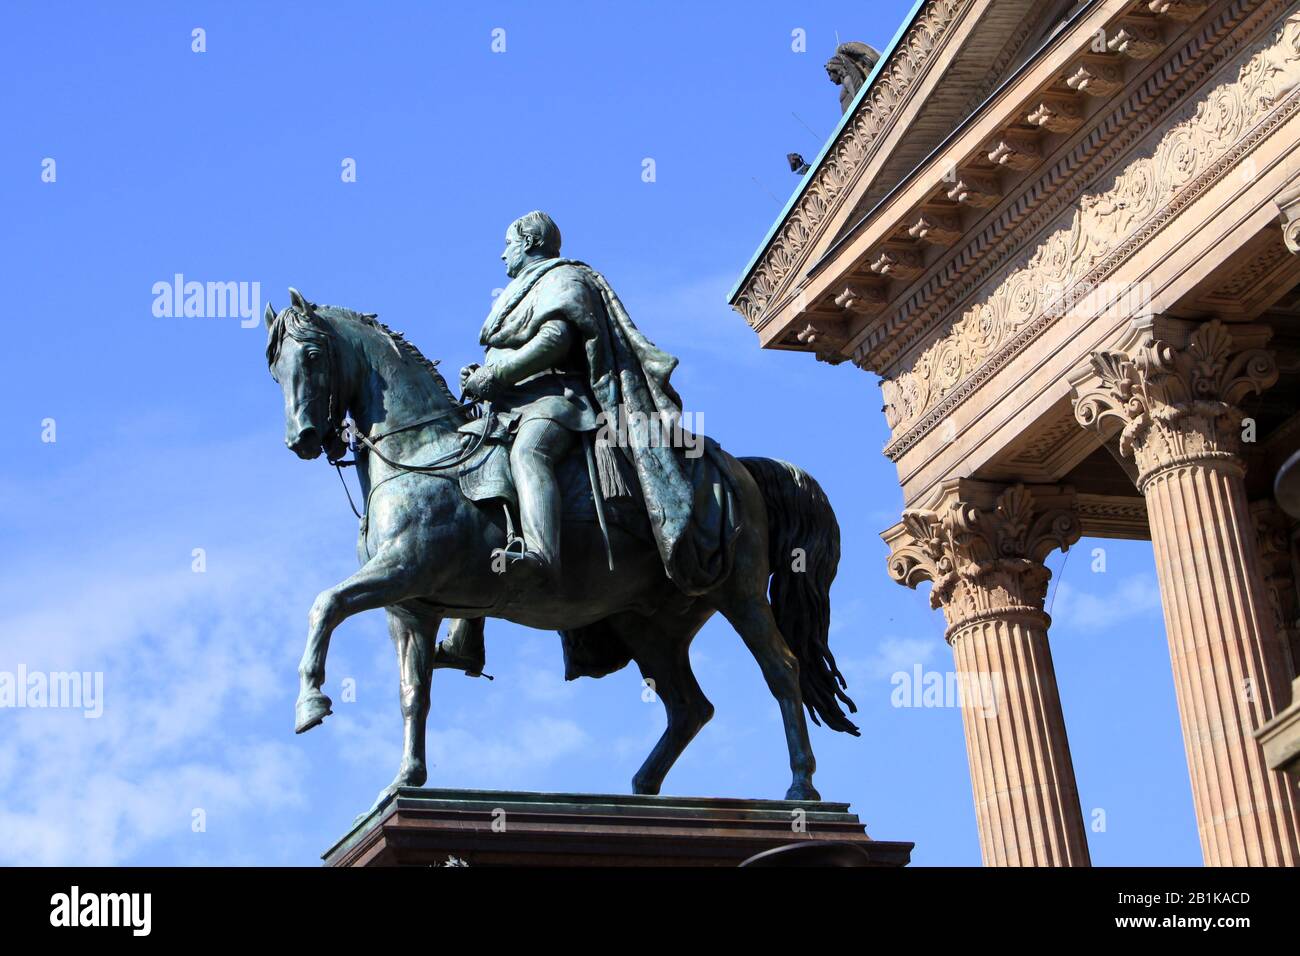 Old National Gallery on Museum Island with equestrian statue of Friedrich Wilhelm IV, Berlin, Germany, 08-17-2013 Stock Photo